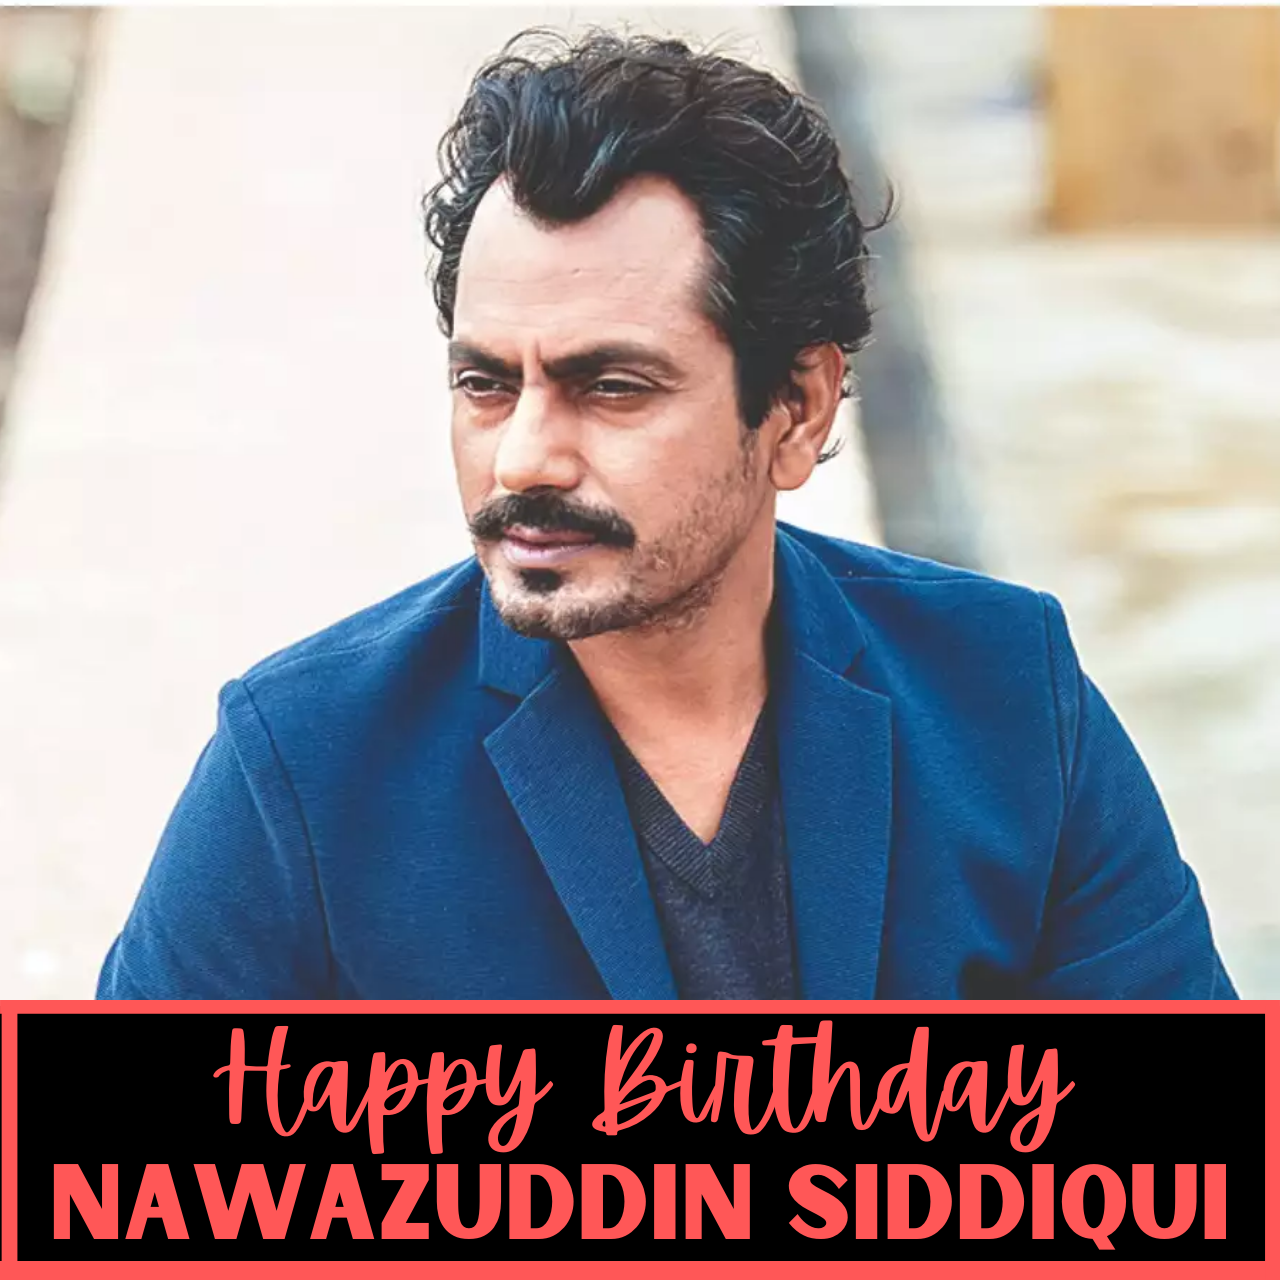 Happy Birthday Nawazuddin Siddiqui: Top Quotes, Images, Wishes, Greetings, And Posters to greet "Nawaz"